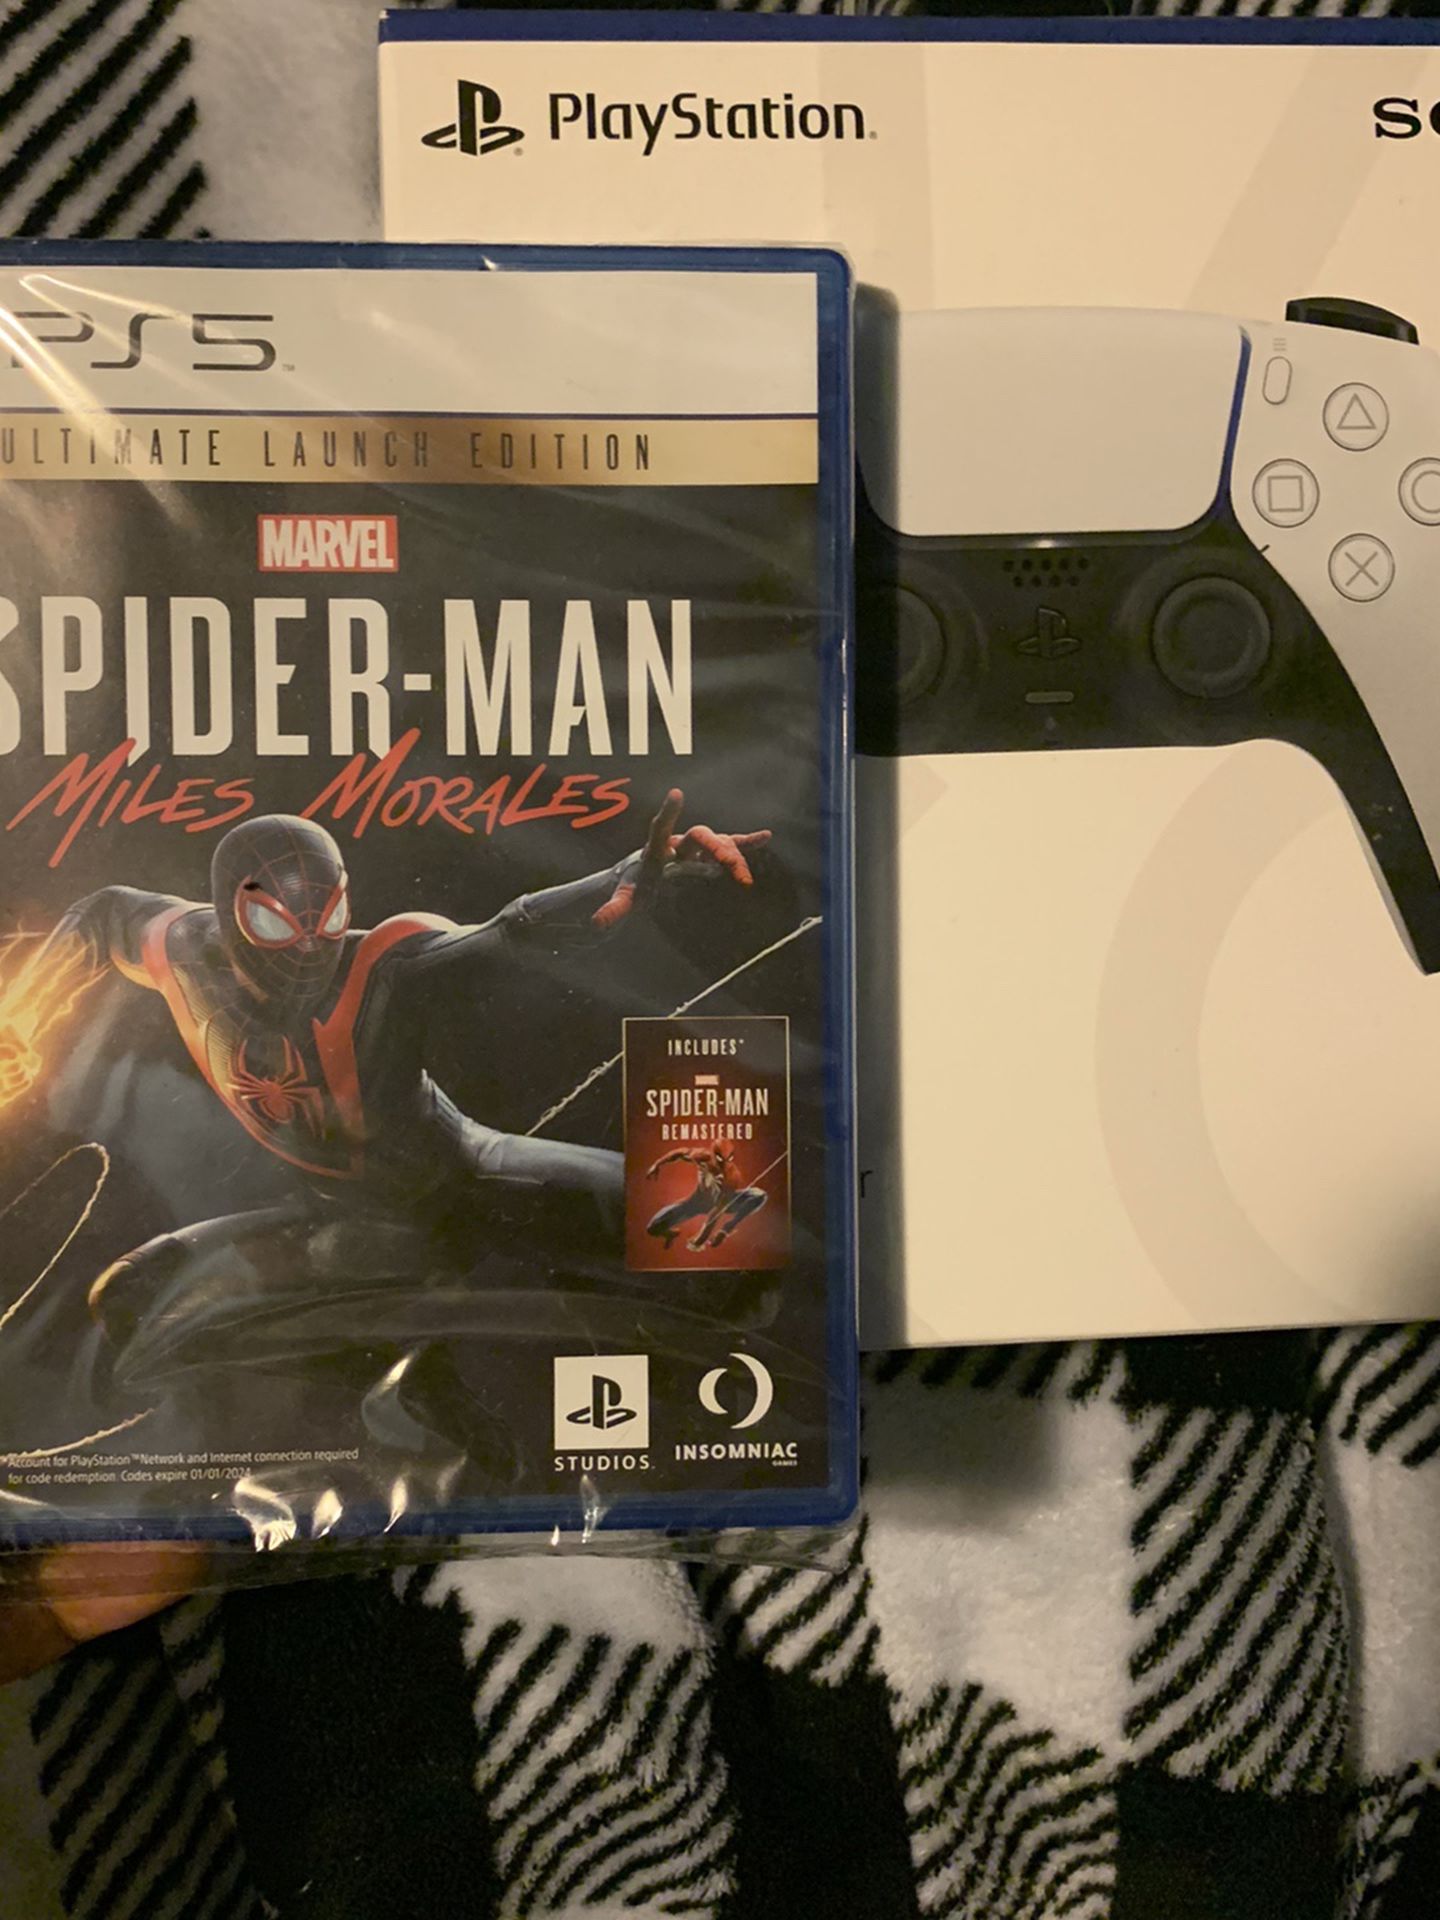 Play Station 5Spiderman Miles Morales Ultimate Edition bro With Ps5 Controller Bundle